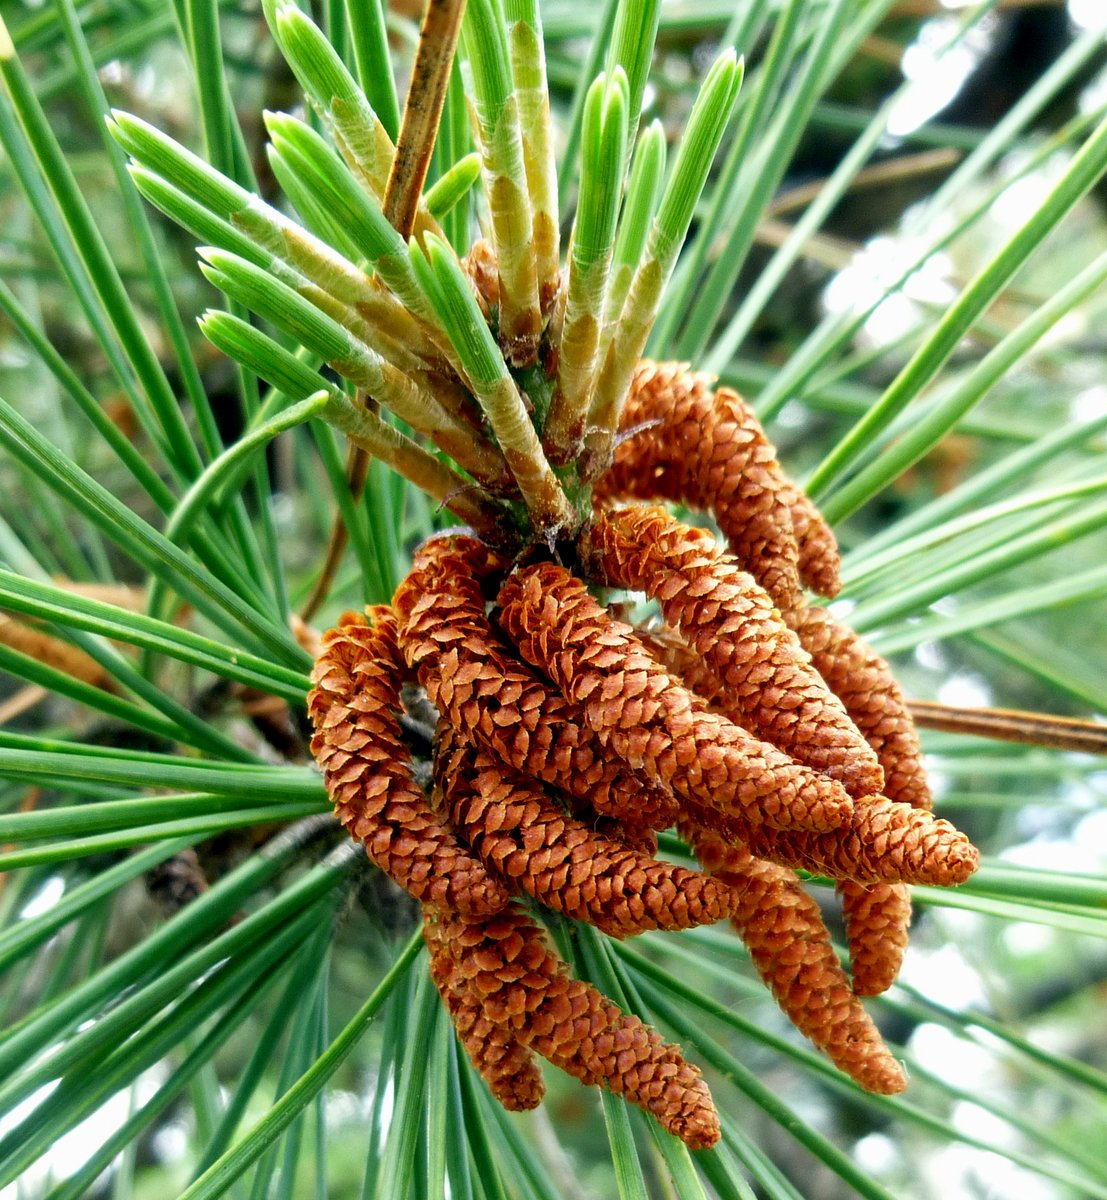 2. Male Cones of Red Pine